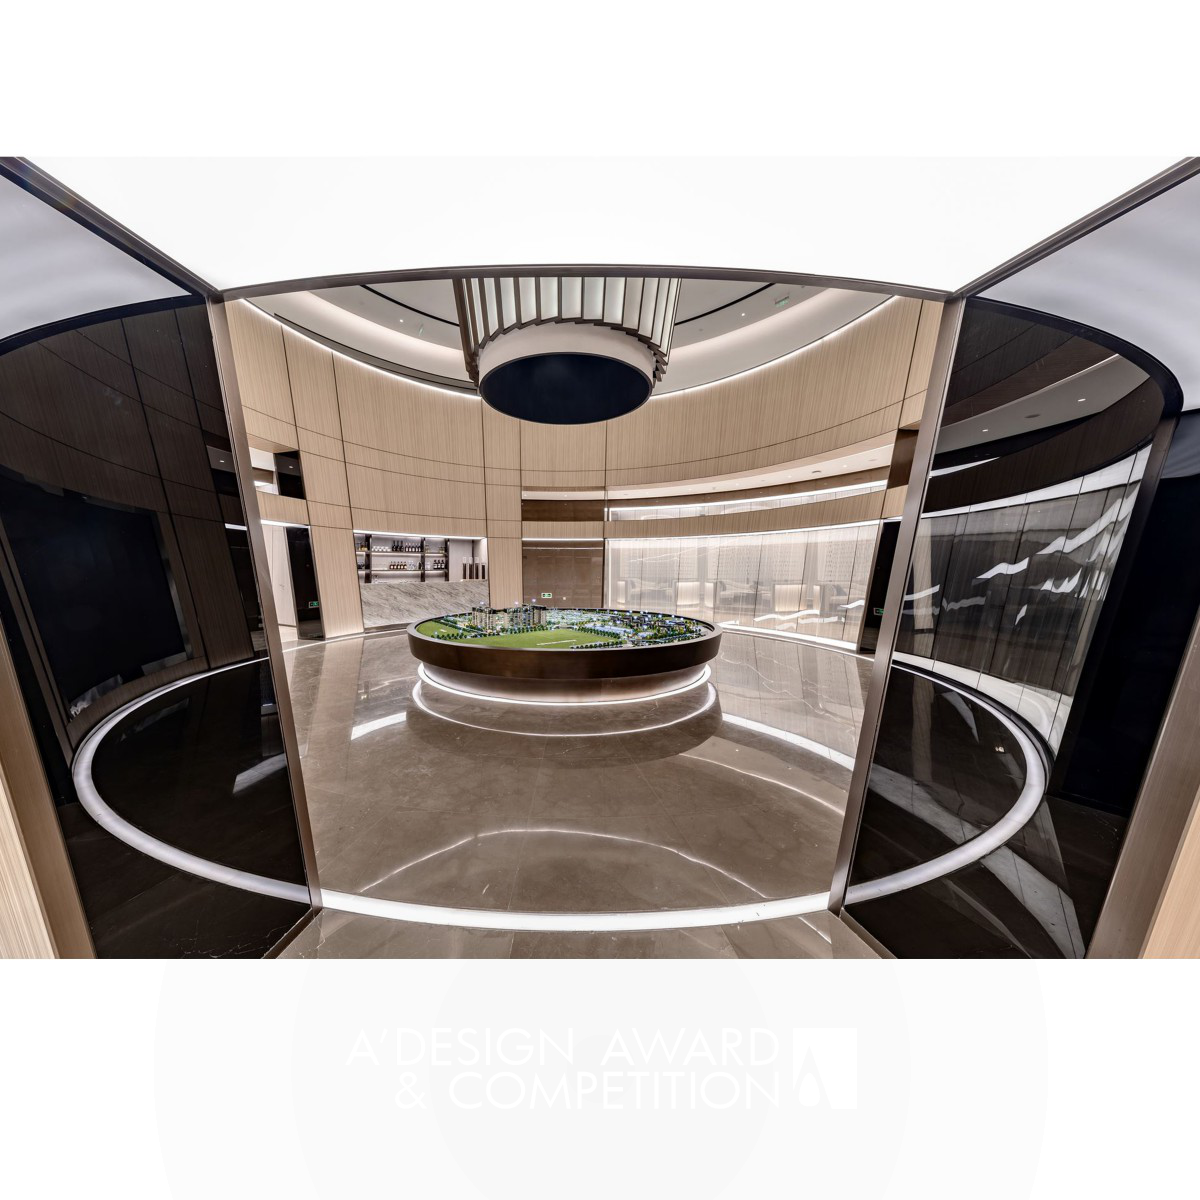 Circle sales center Sales Center by Kris Lin Bronze Interior Space and Exhibition Design Award Winner 2019 